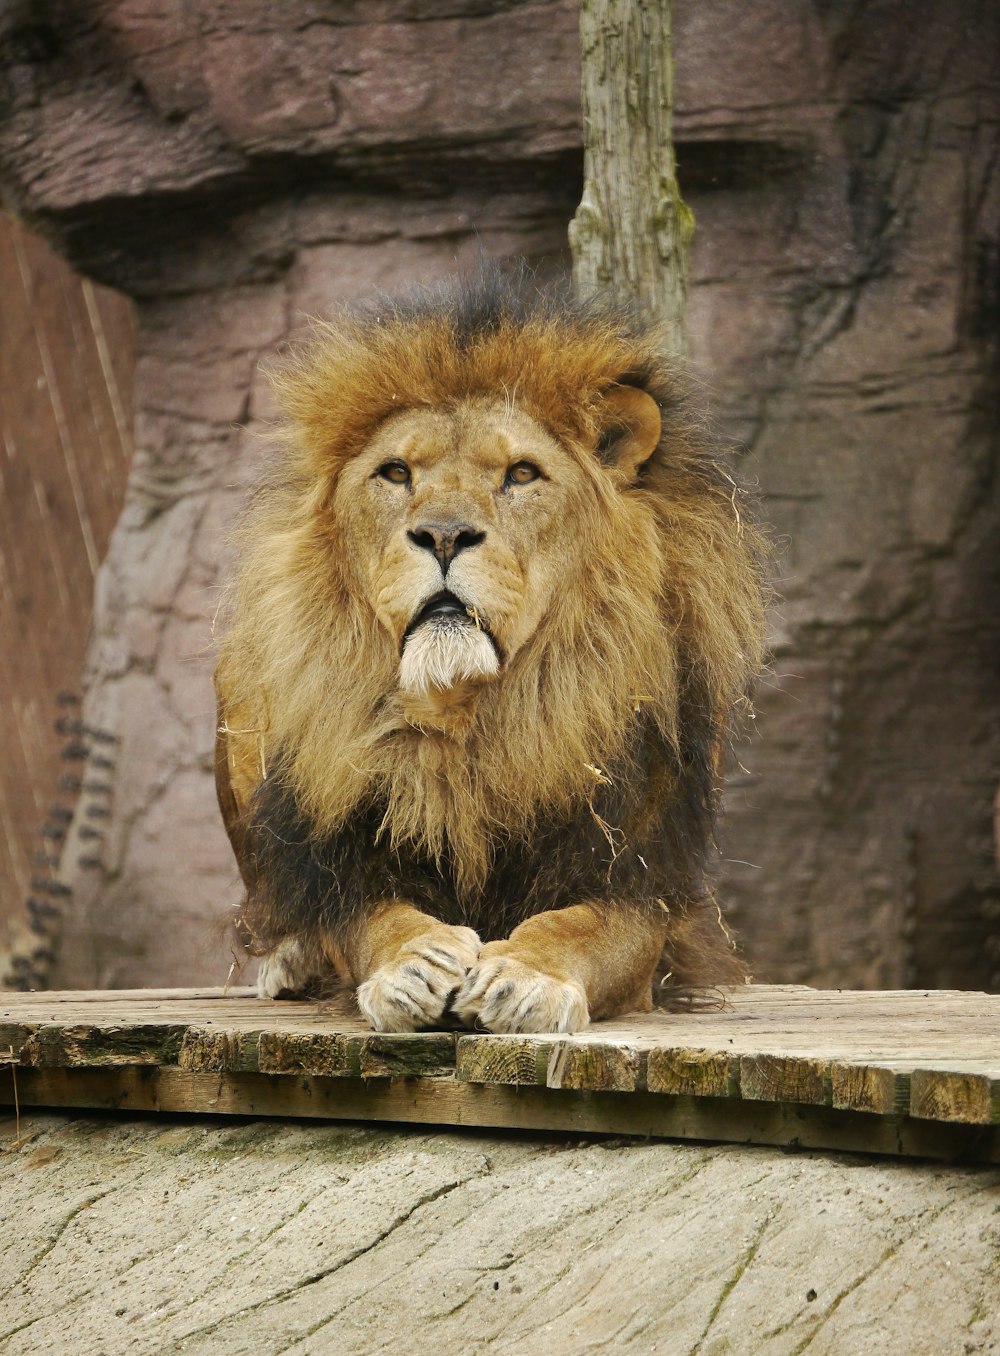 a lion sitting on a ledge in a zoo